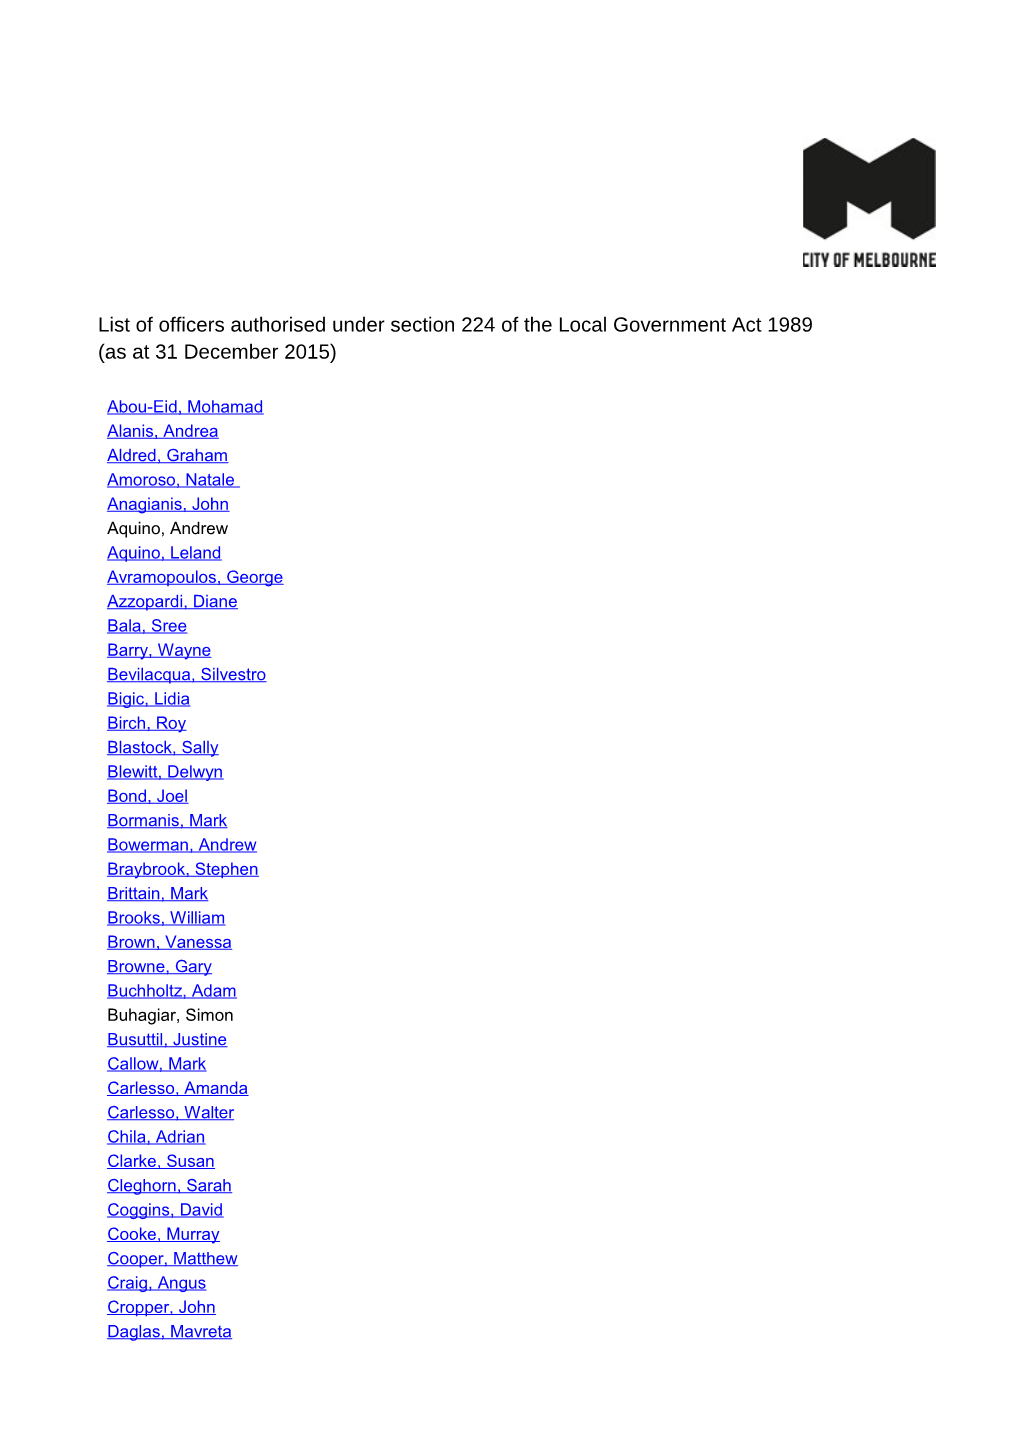 List of Officers Authorised Under Section 224 of the Local Government Act 1989